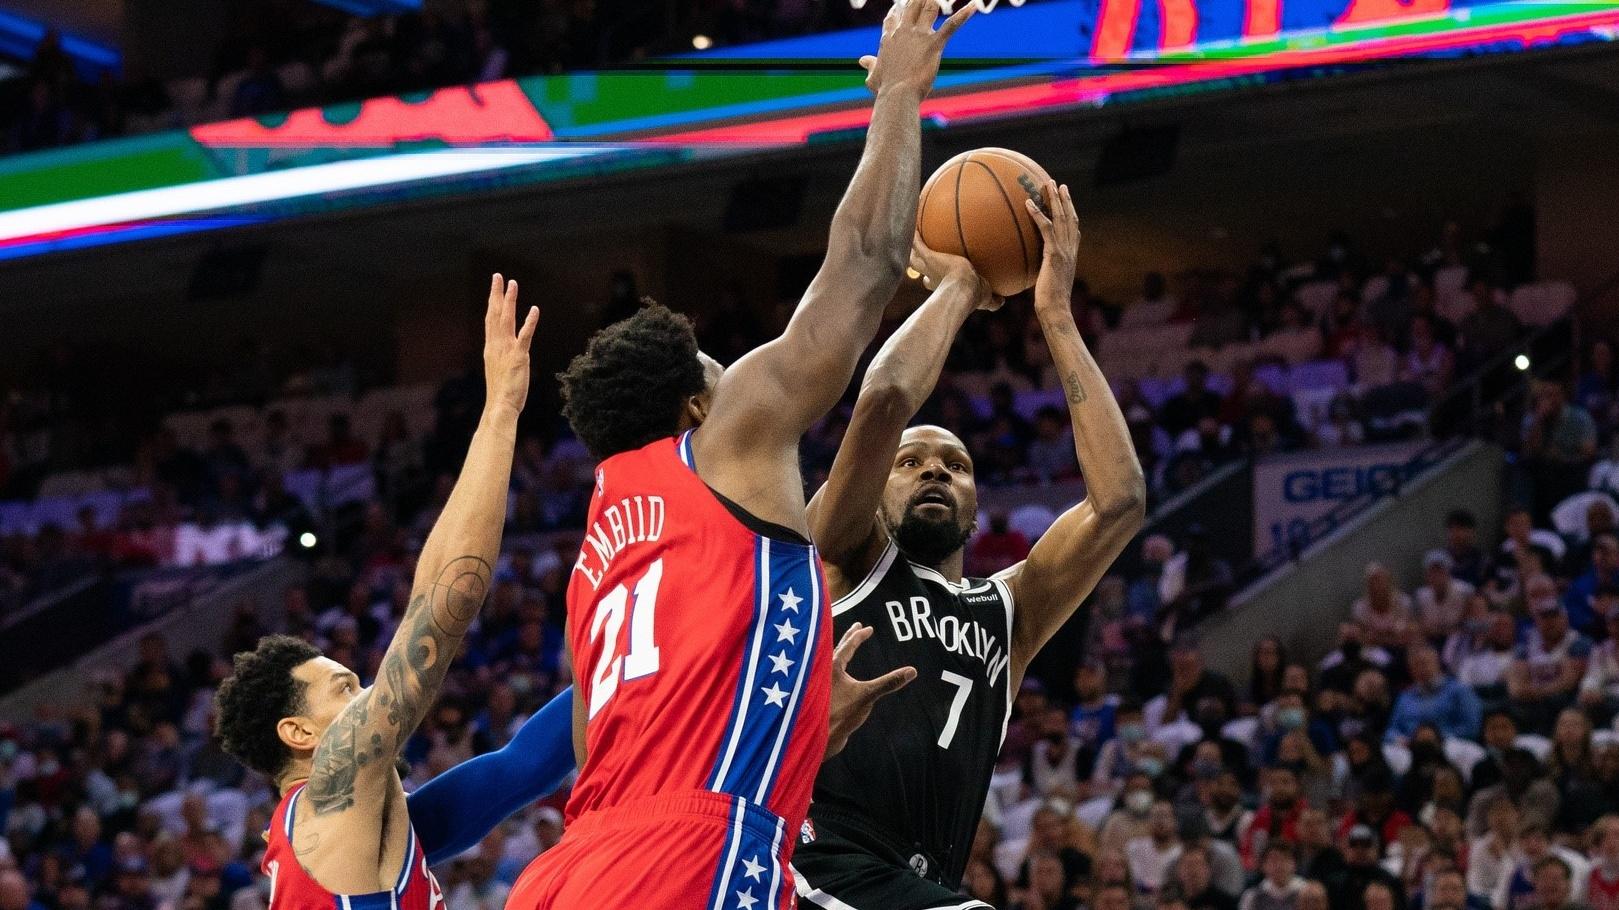 Oct 22, 2021; Philadelphia, Pennsylvania, USA; Brooklyn Nets forward Kevin Durant (7) drives for a shot against Philadelphia 76ers center Joel Embiid (21) during the first quarter at Wells Fargo Center / Bill Streicher-USA TODAY Sports